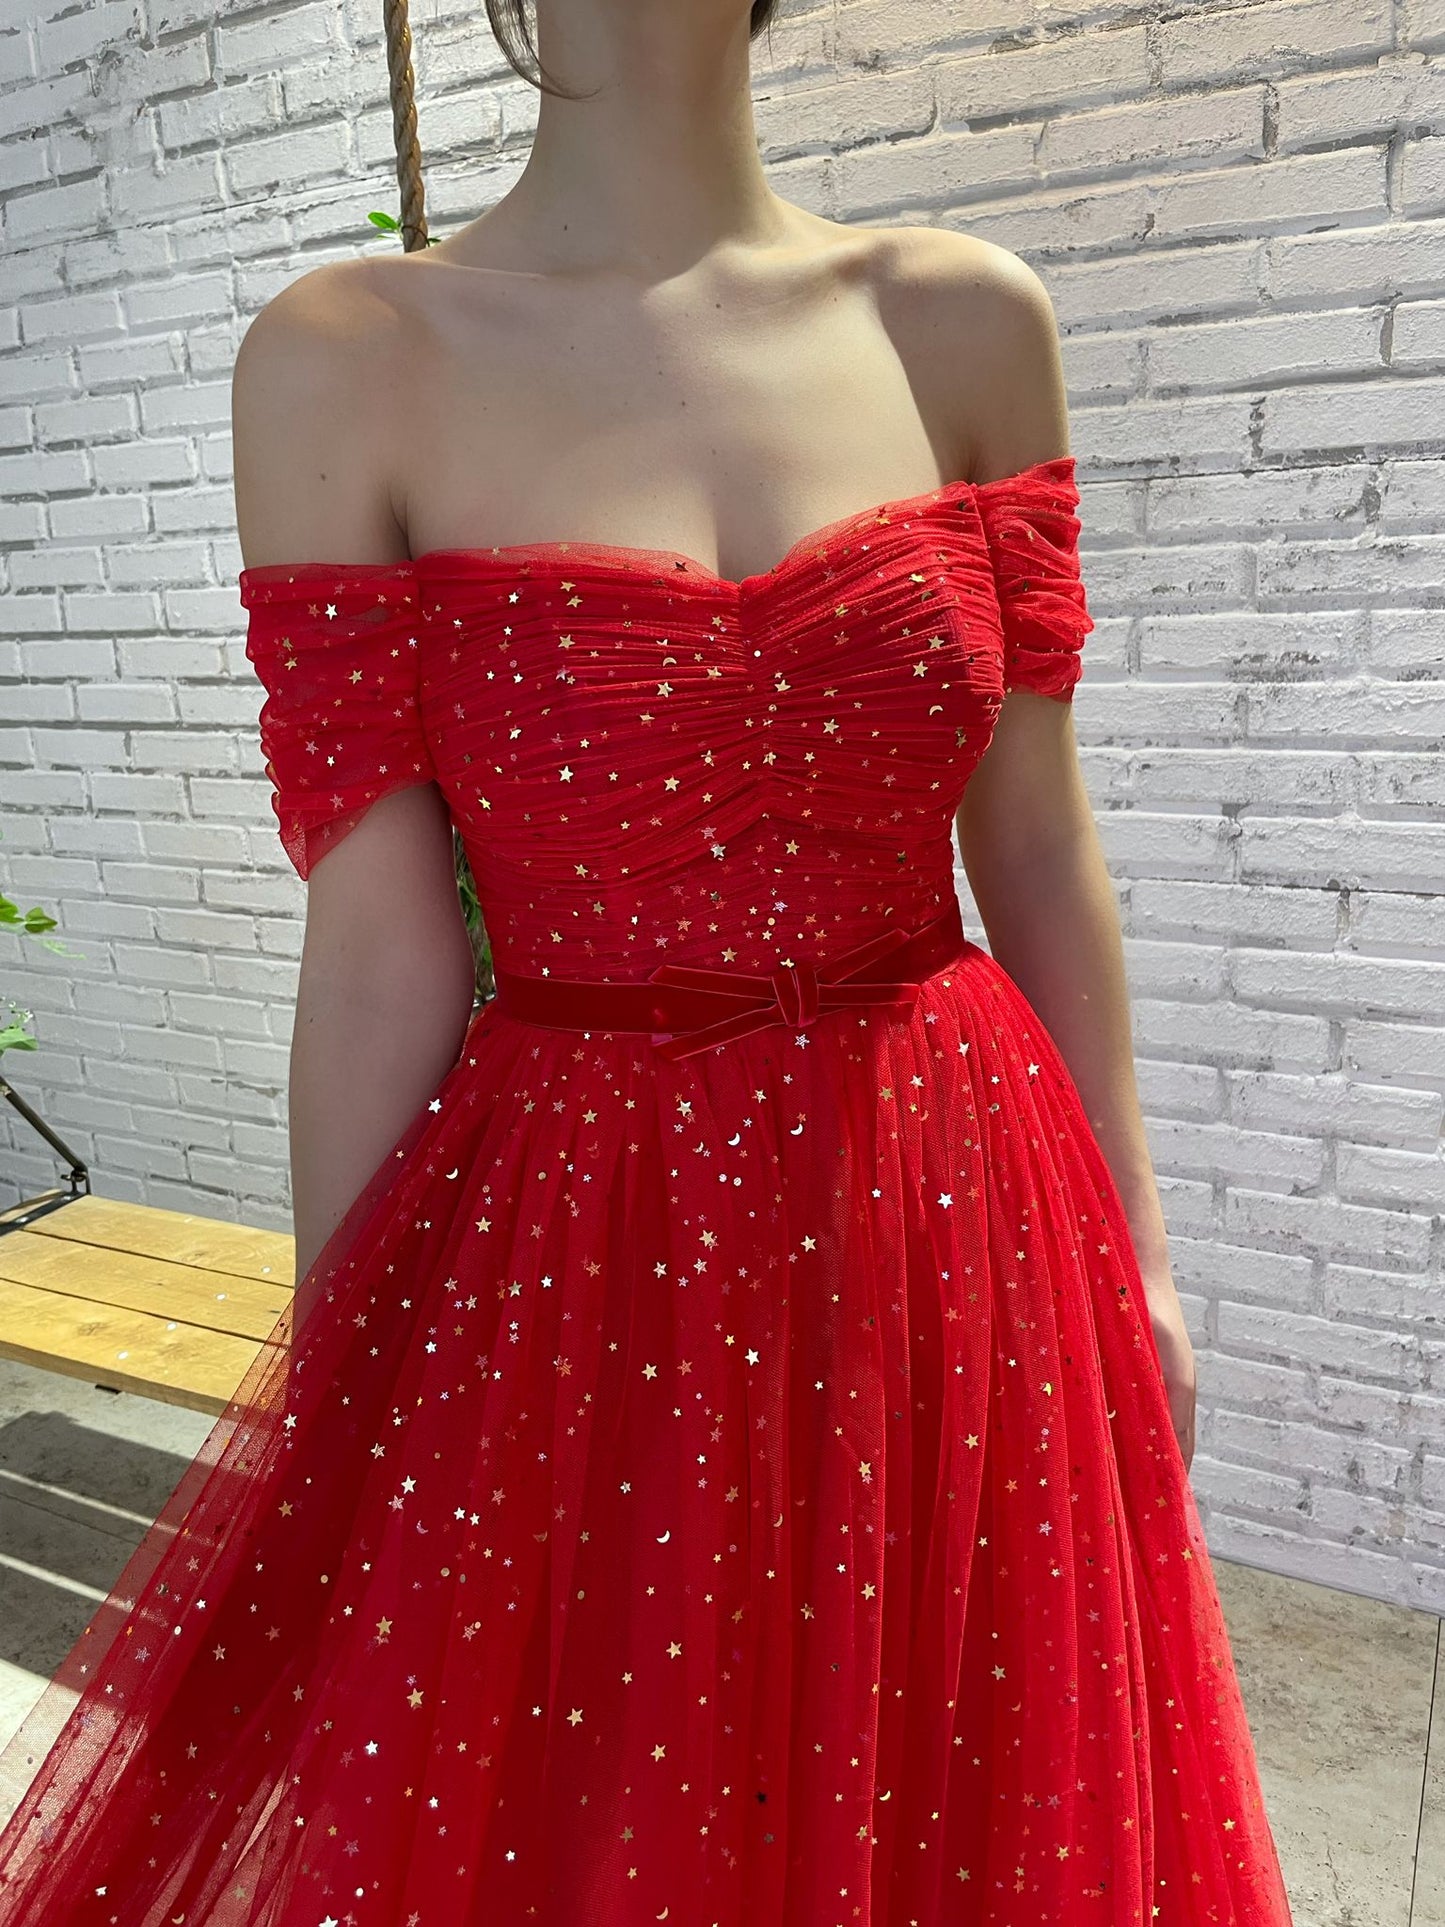 Red A-Line dress with off the shoulder sleeves and starry fabric